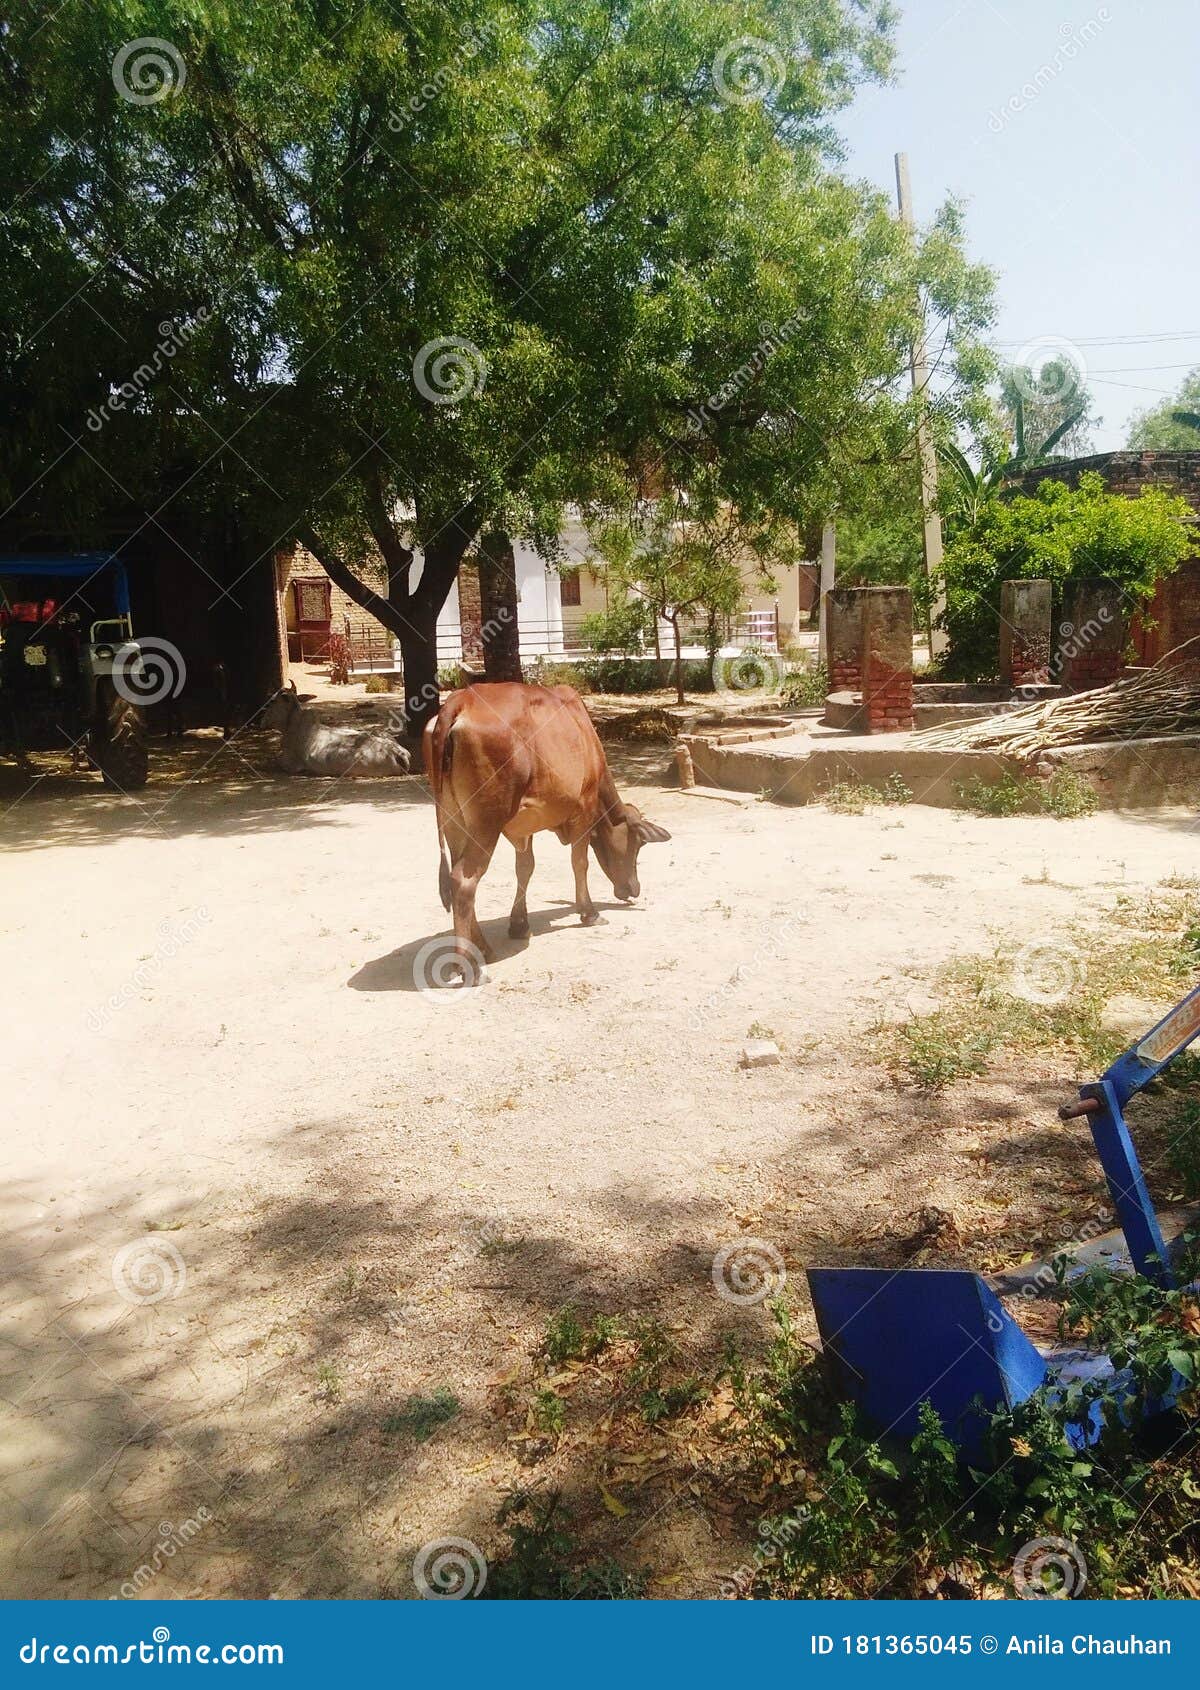 Village of India with Domestic Animals Cow. Stock Image - Image of domestic,  grass: 181365045